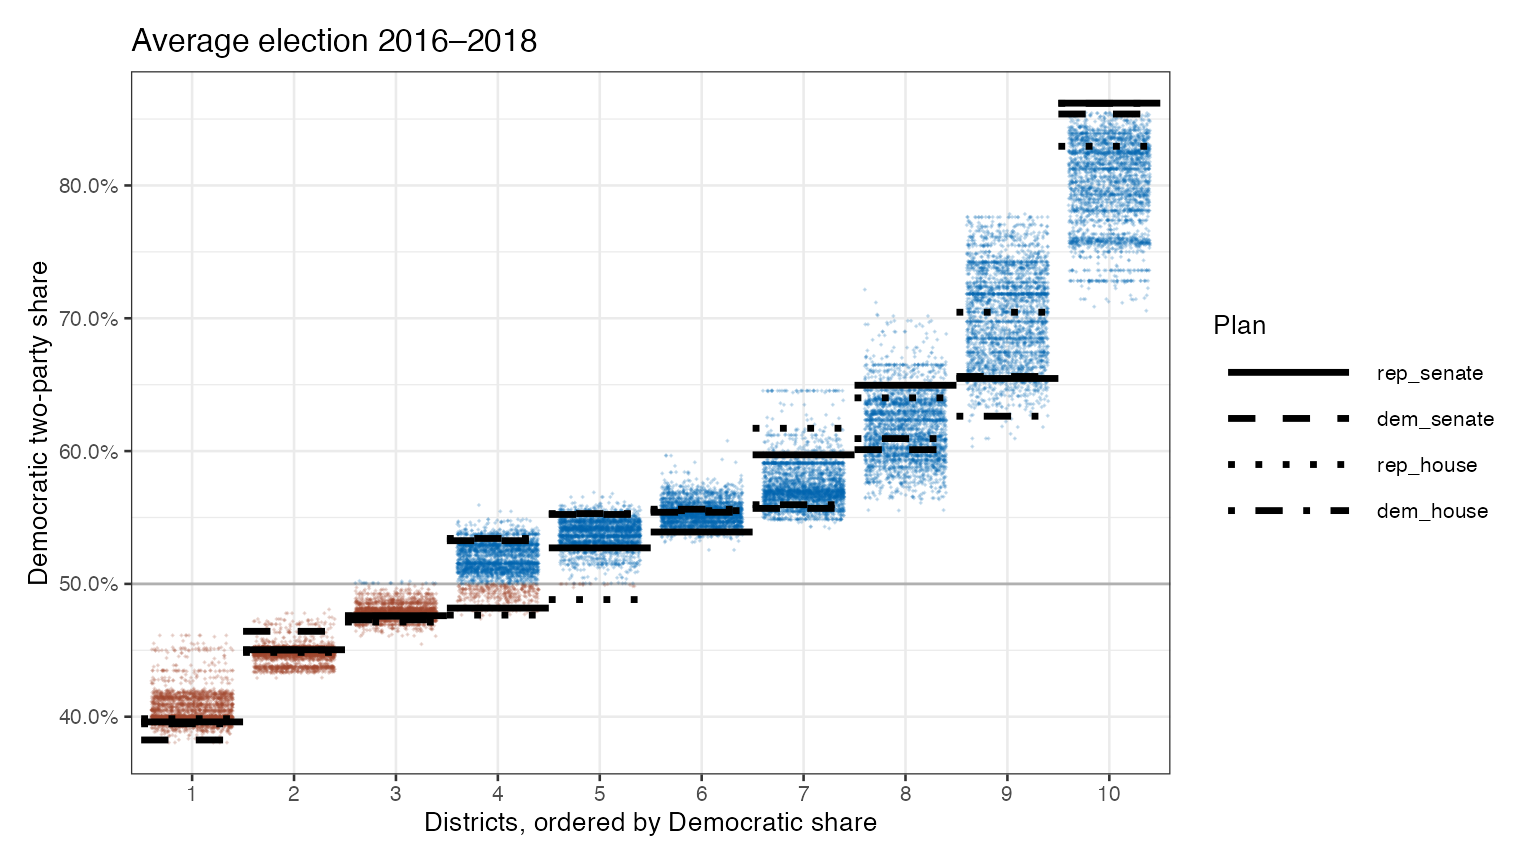 Democratic vote by district for the four plans and for 3,000 alternative plans. [Learn more about this plot](../../methods.html#district-vote-share-plots)